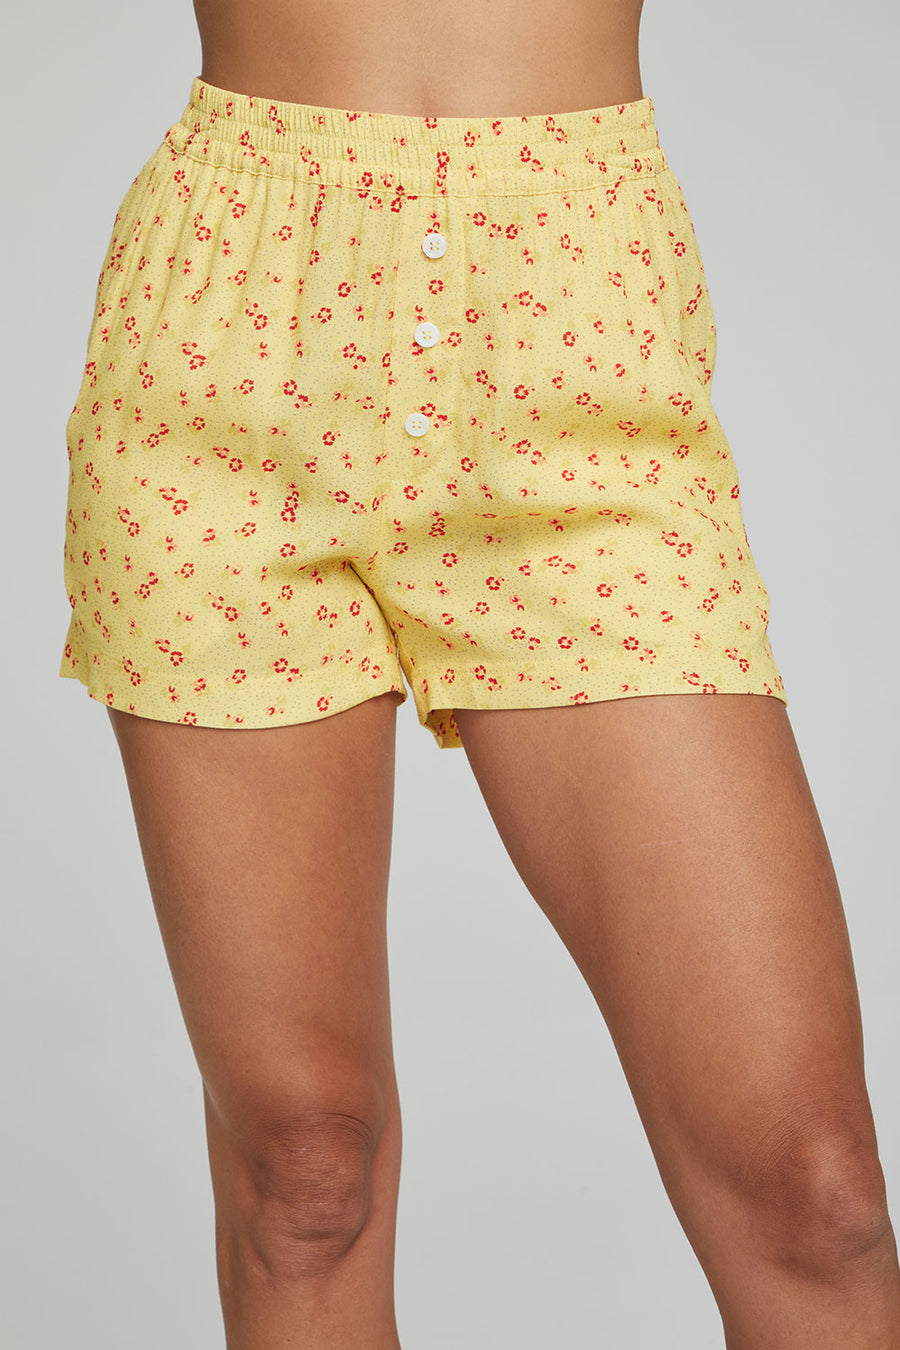 Ollie Boxer Shorts - Anise Flower Print WOMENS chaserbrand